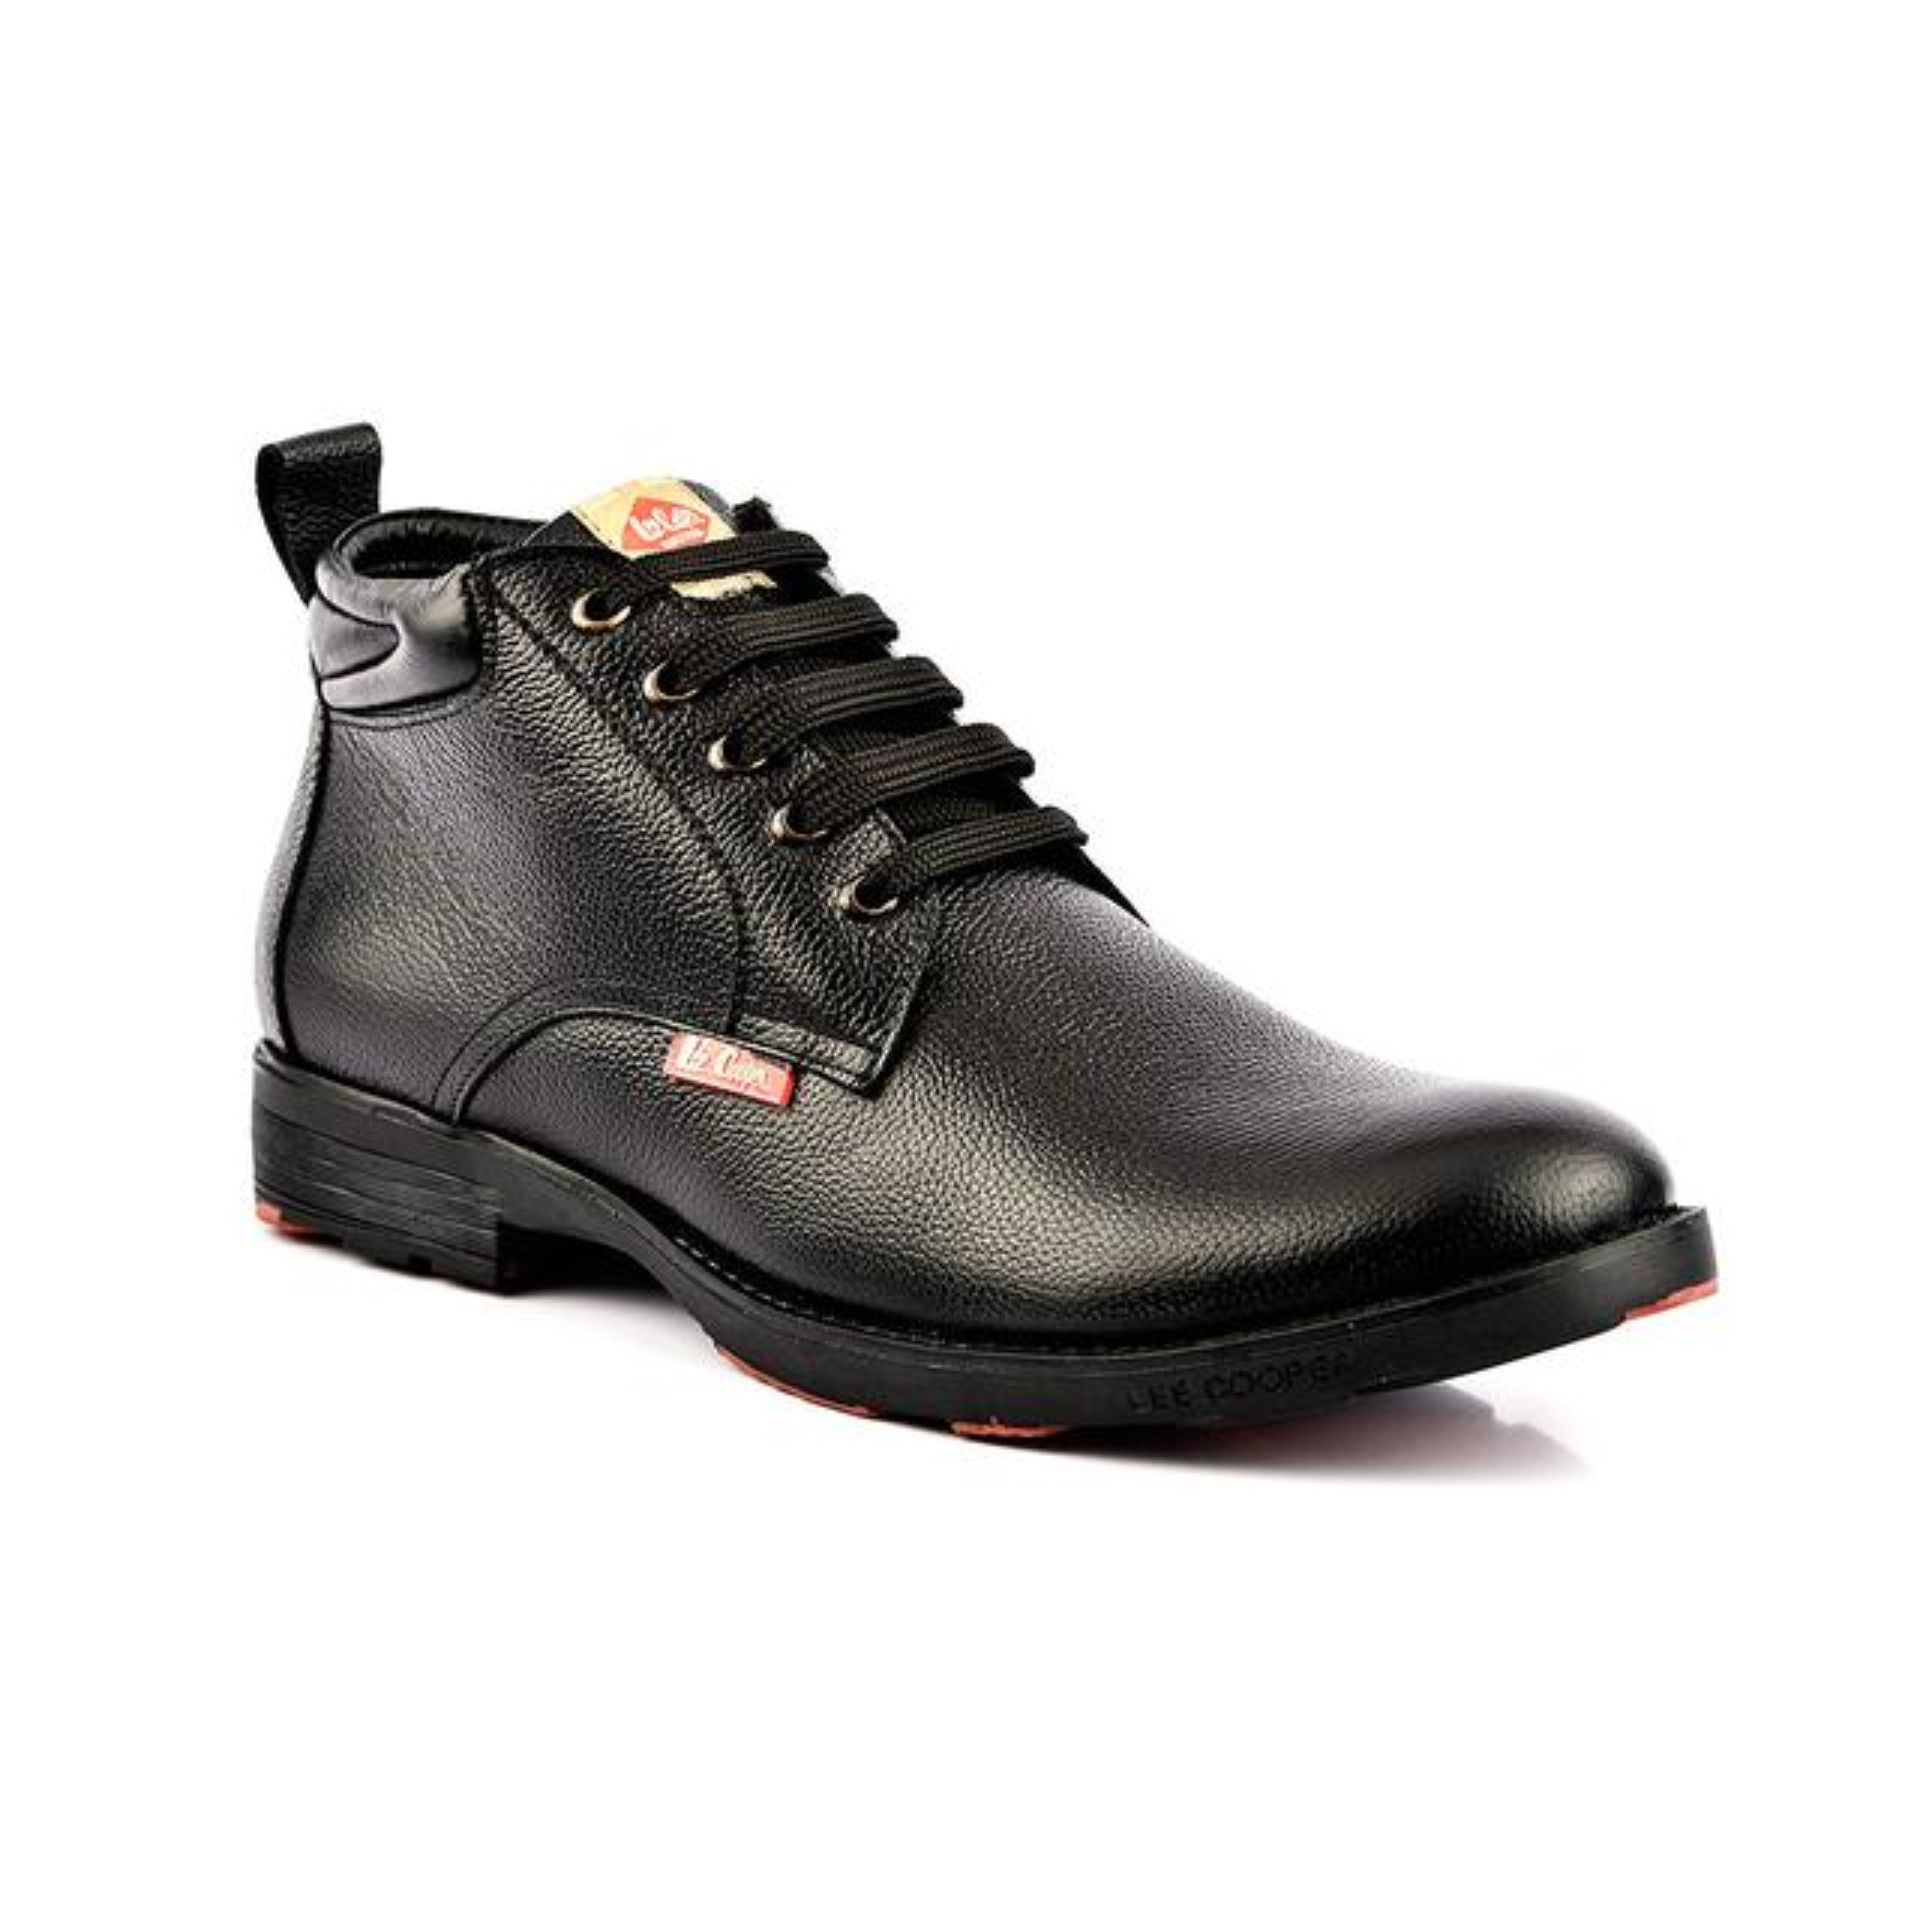 Lee Cooper Lifestyle Black Casual Shoes - Buy Lee Cooper Lifestyle ...